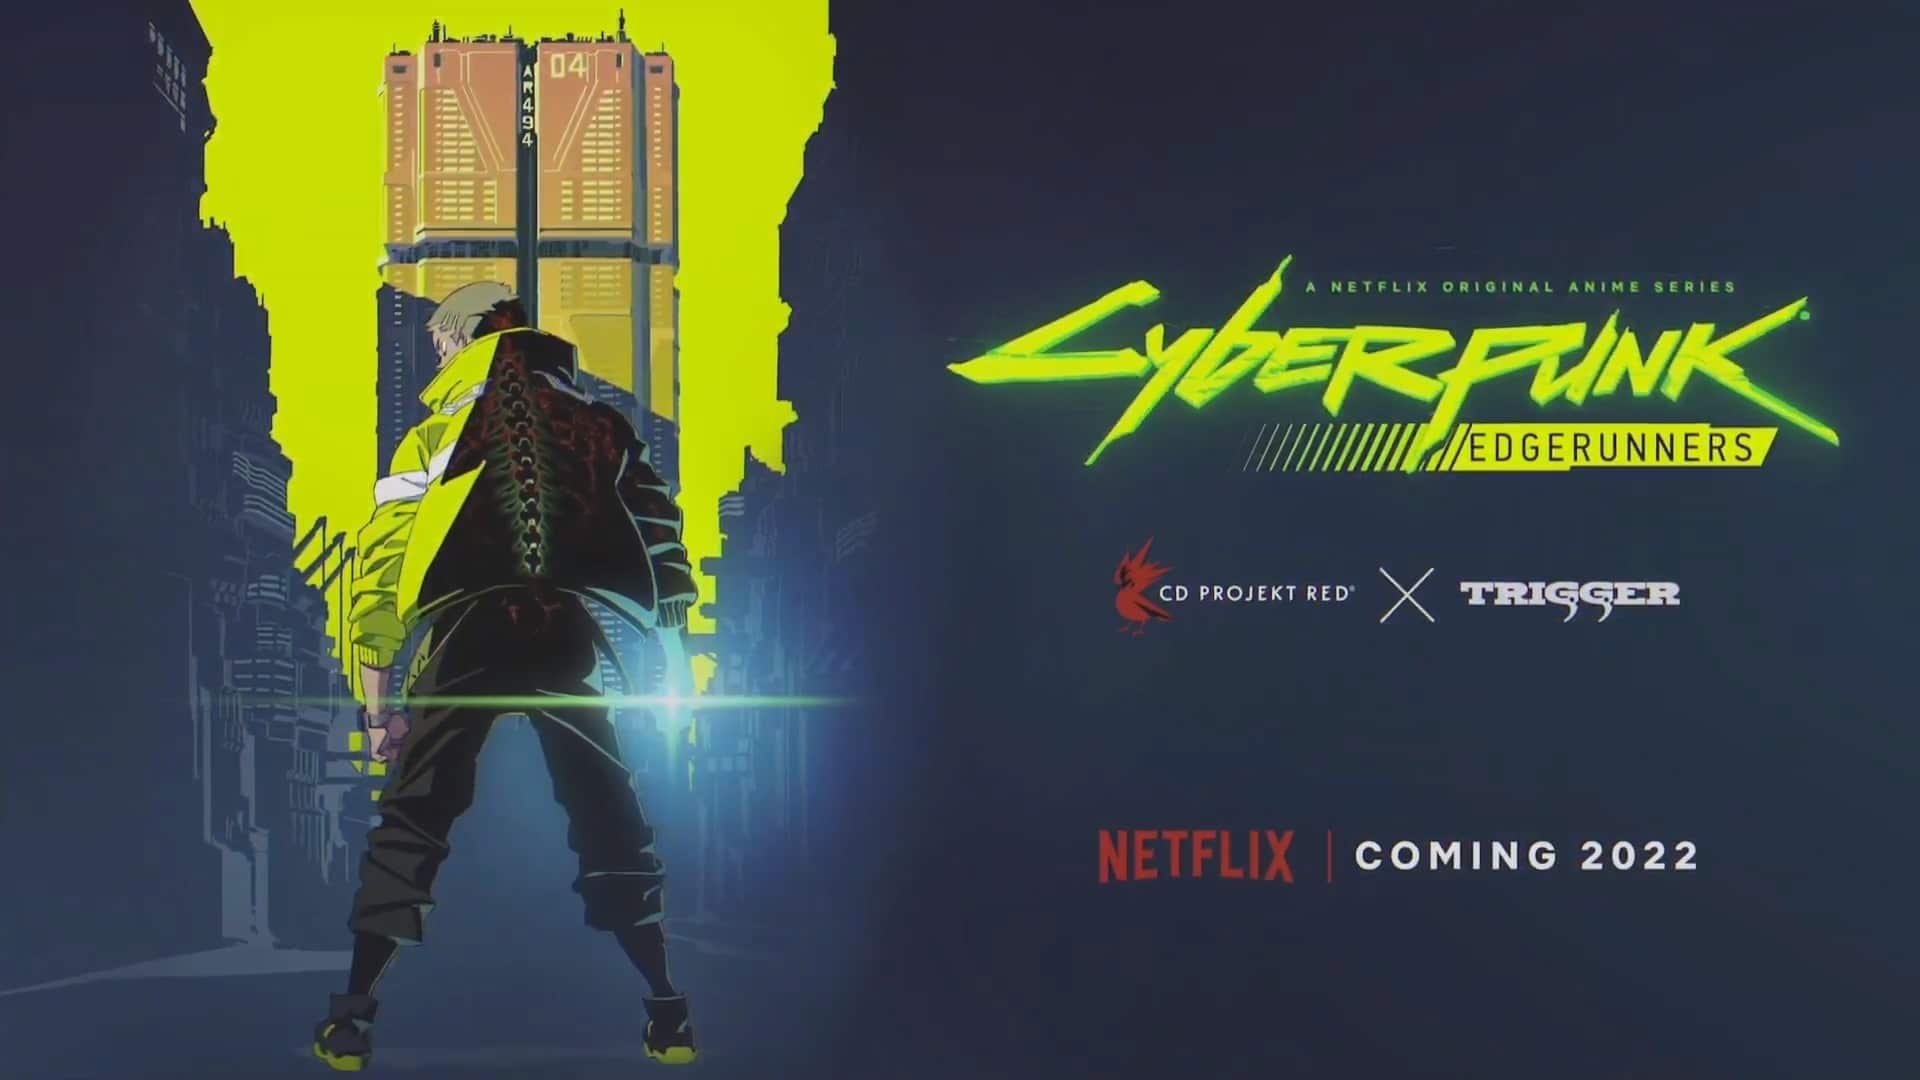 New Cyberpunk 2077 Anime Coming To Netflix In 2022